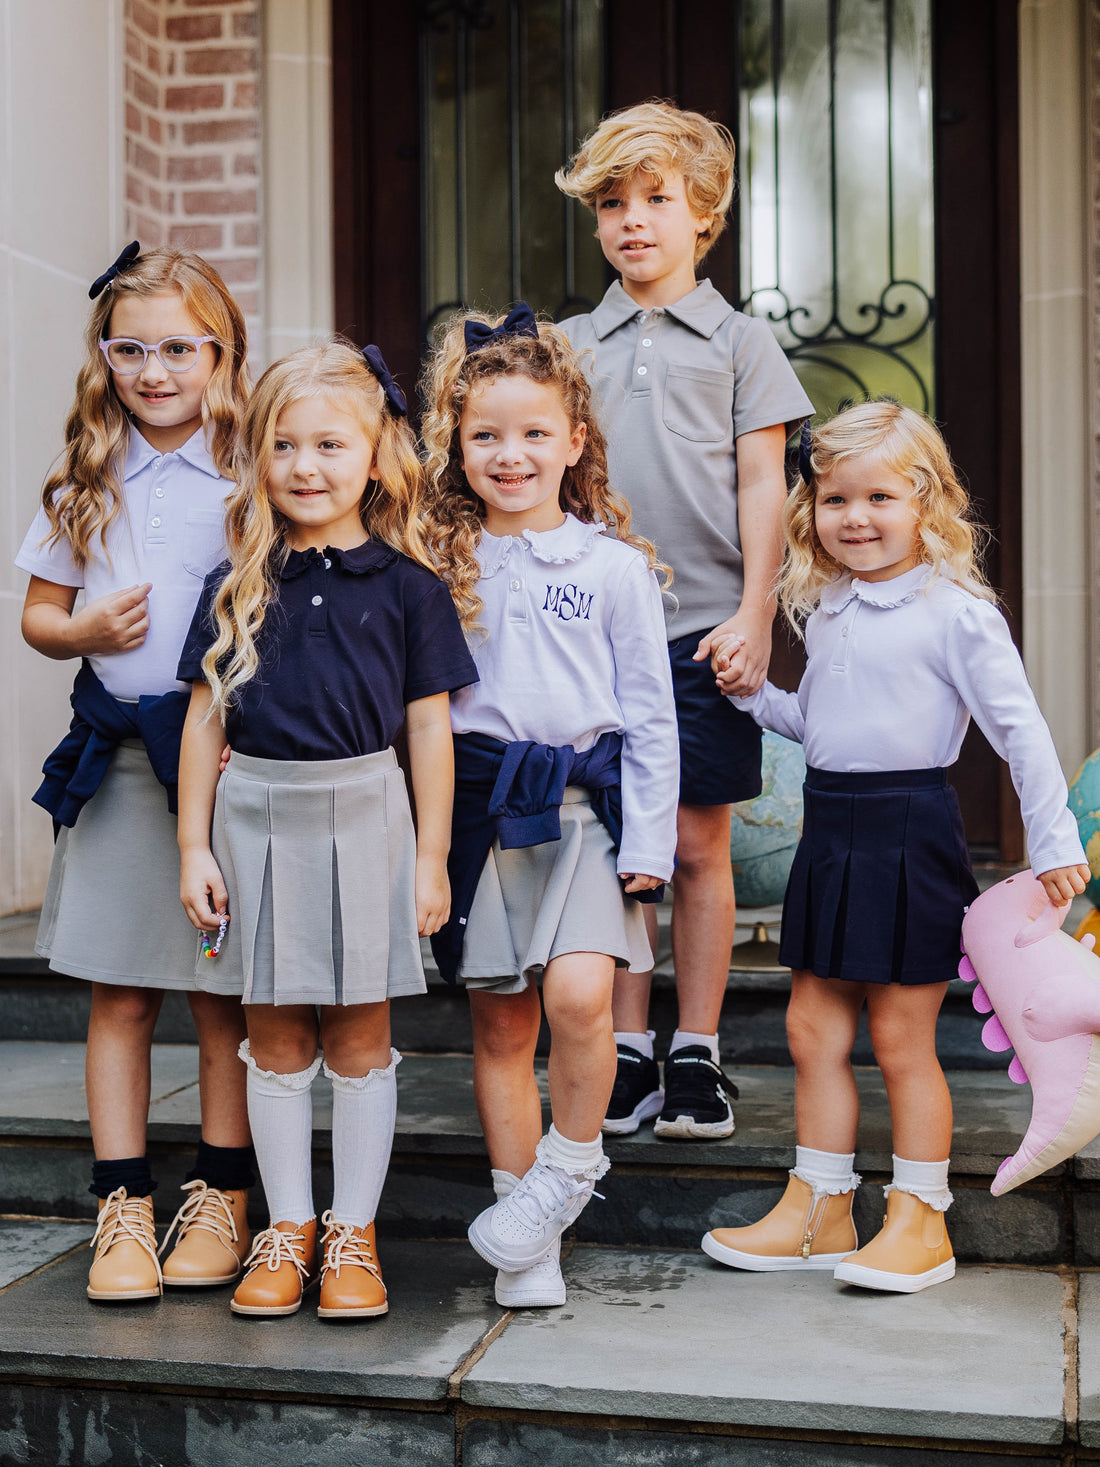 First Day of School: Fun Ideas to Make the Day Memorable